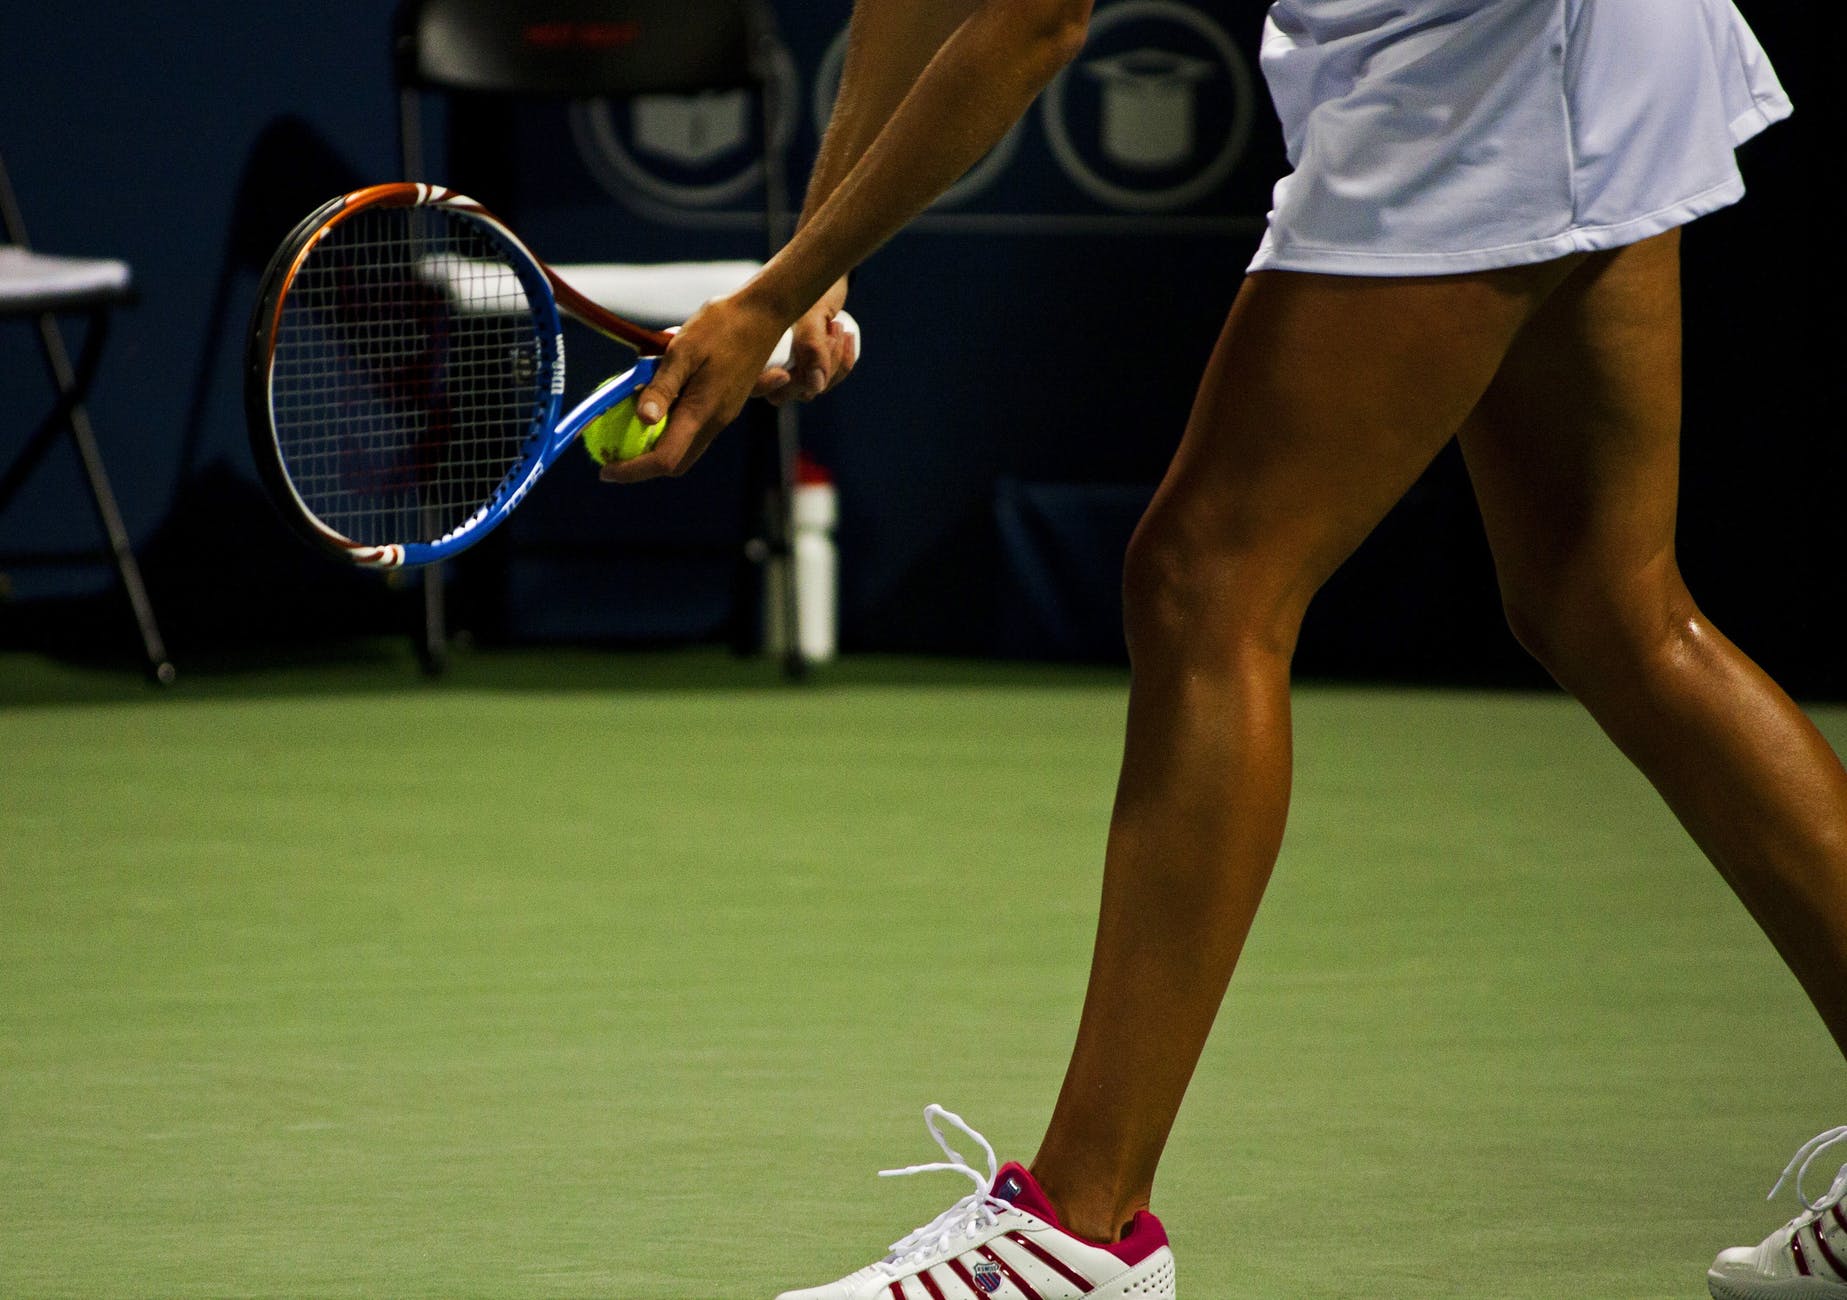 4 Pro Tips for Practicing Tennis